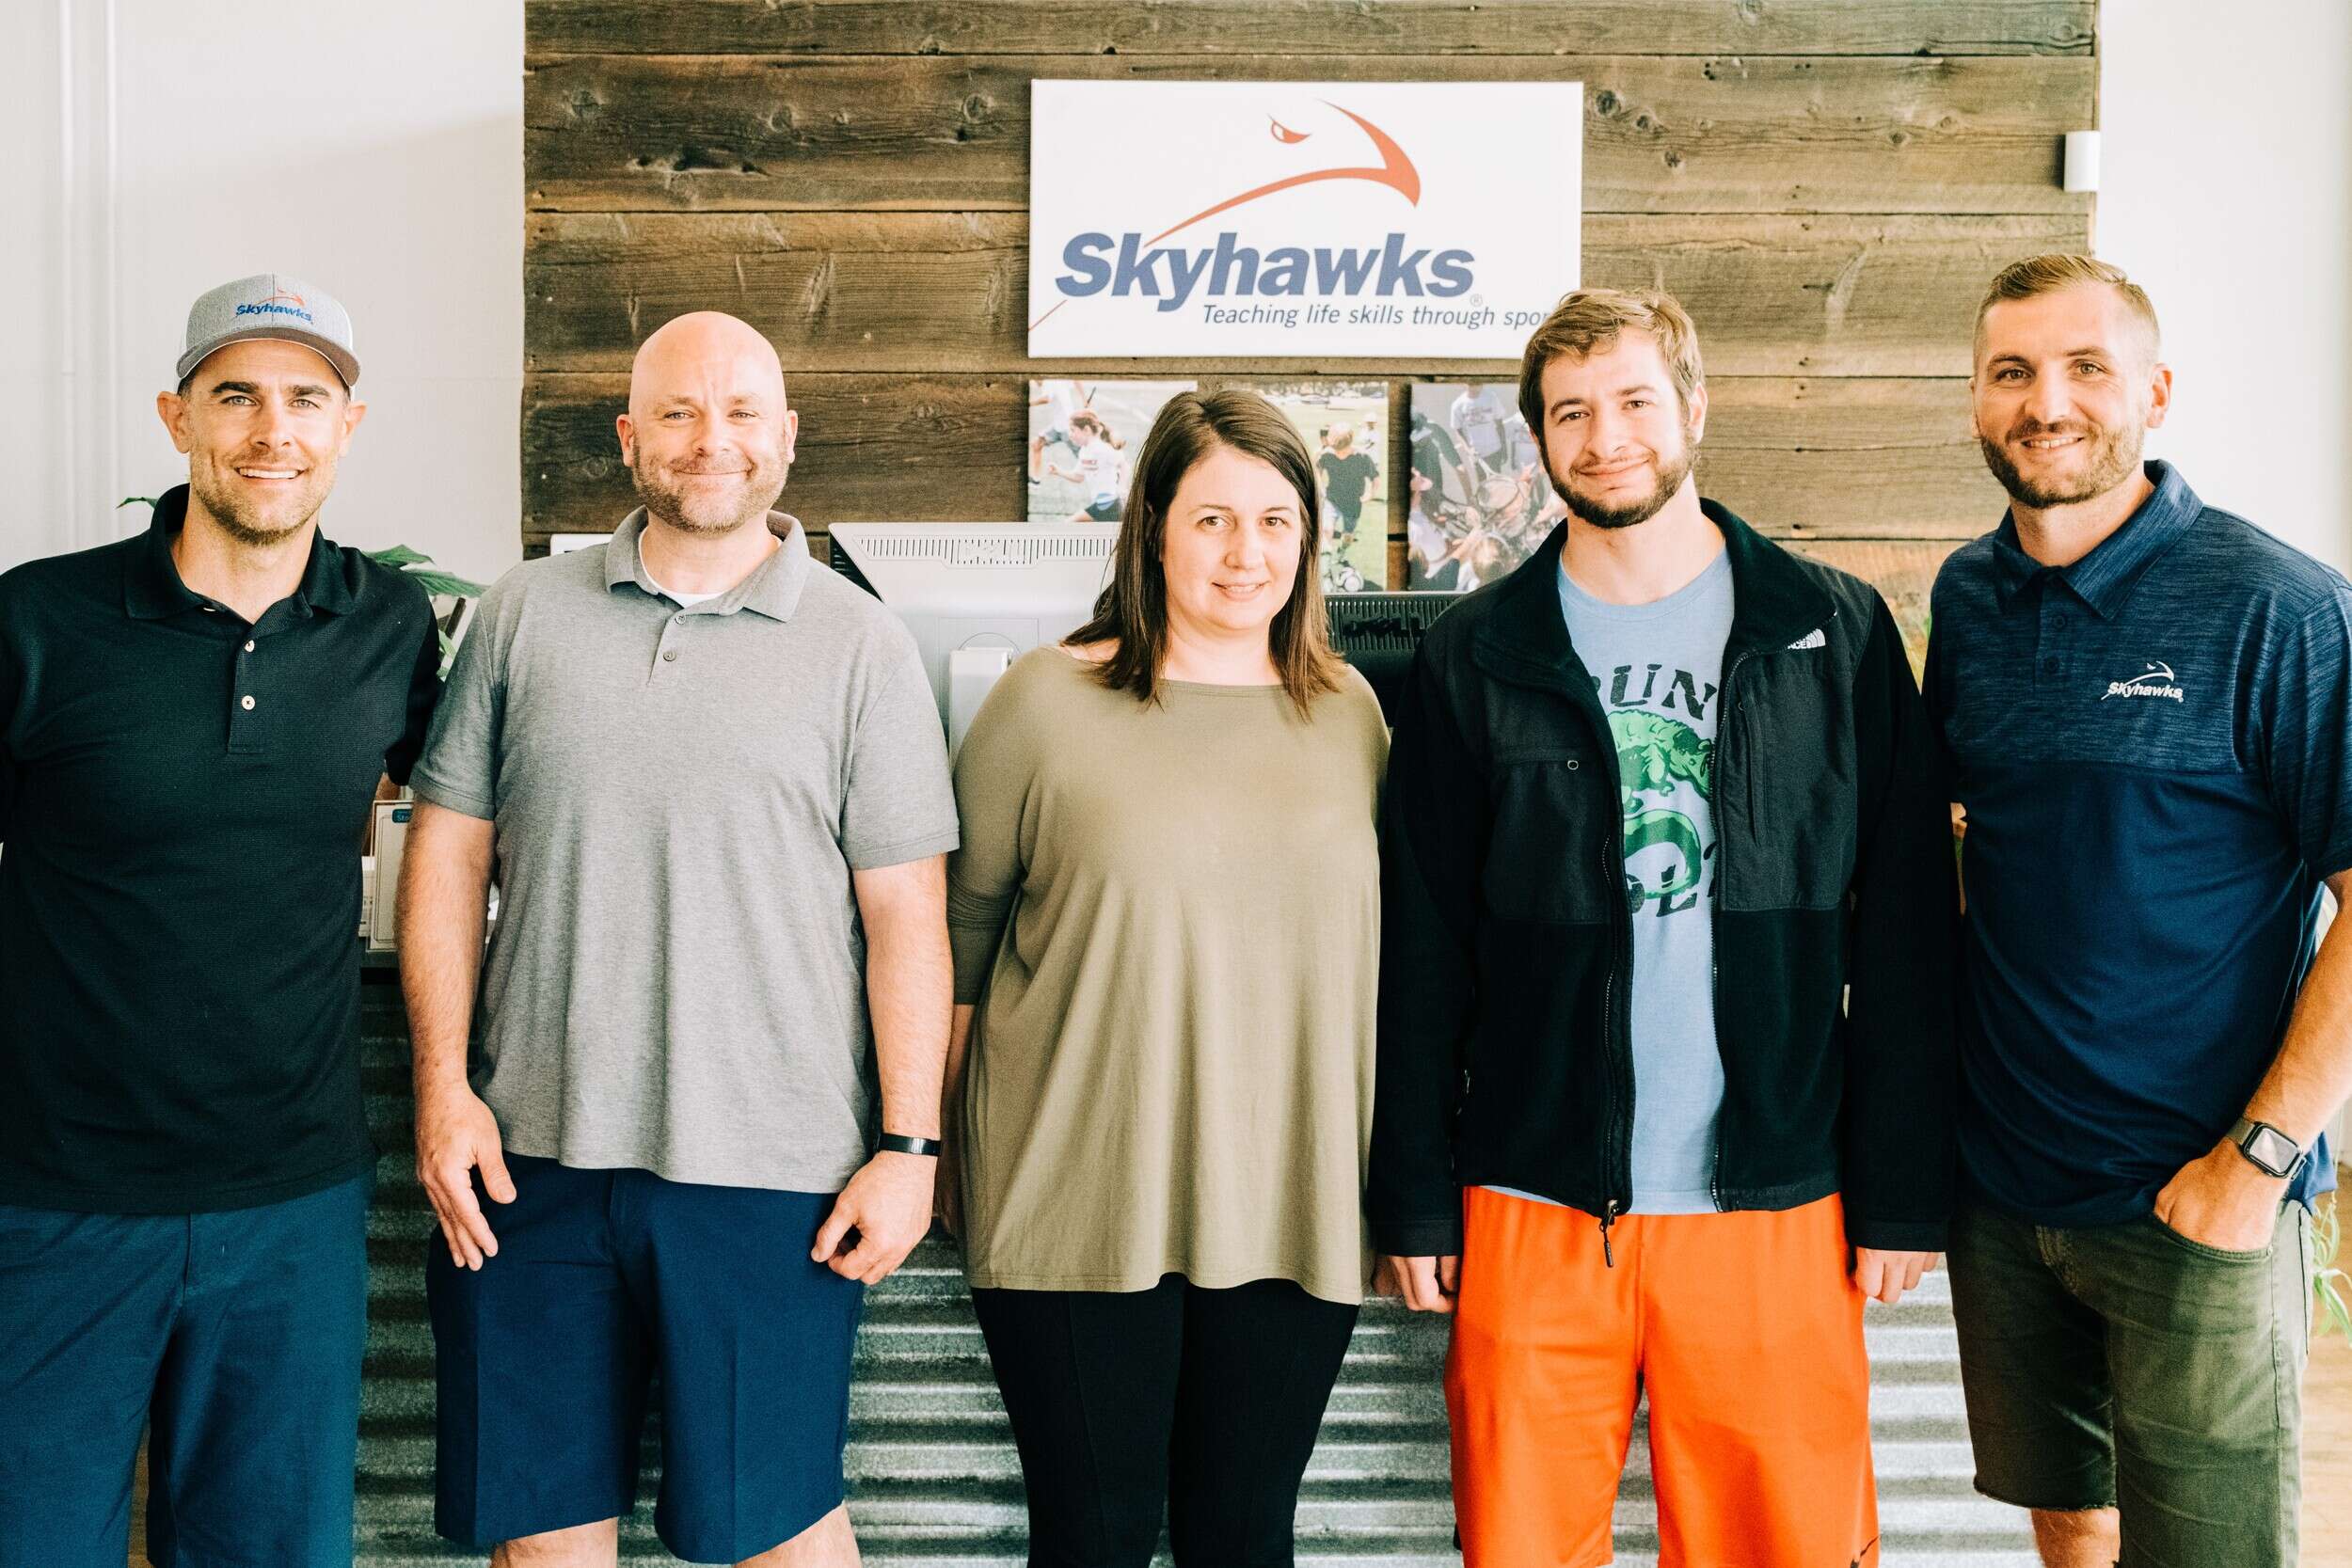 New Skyhawks Sports Franchise Opens in New Orleans